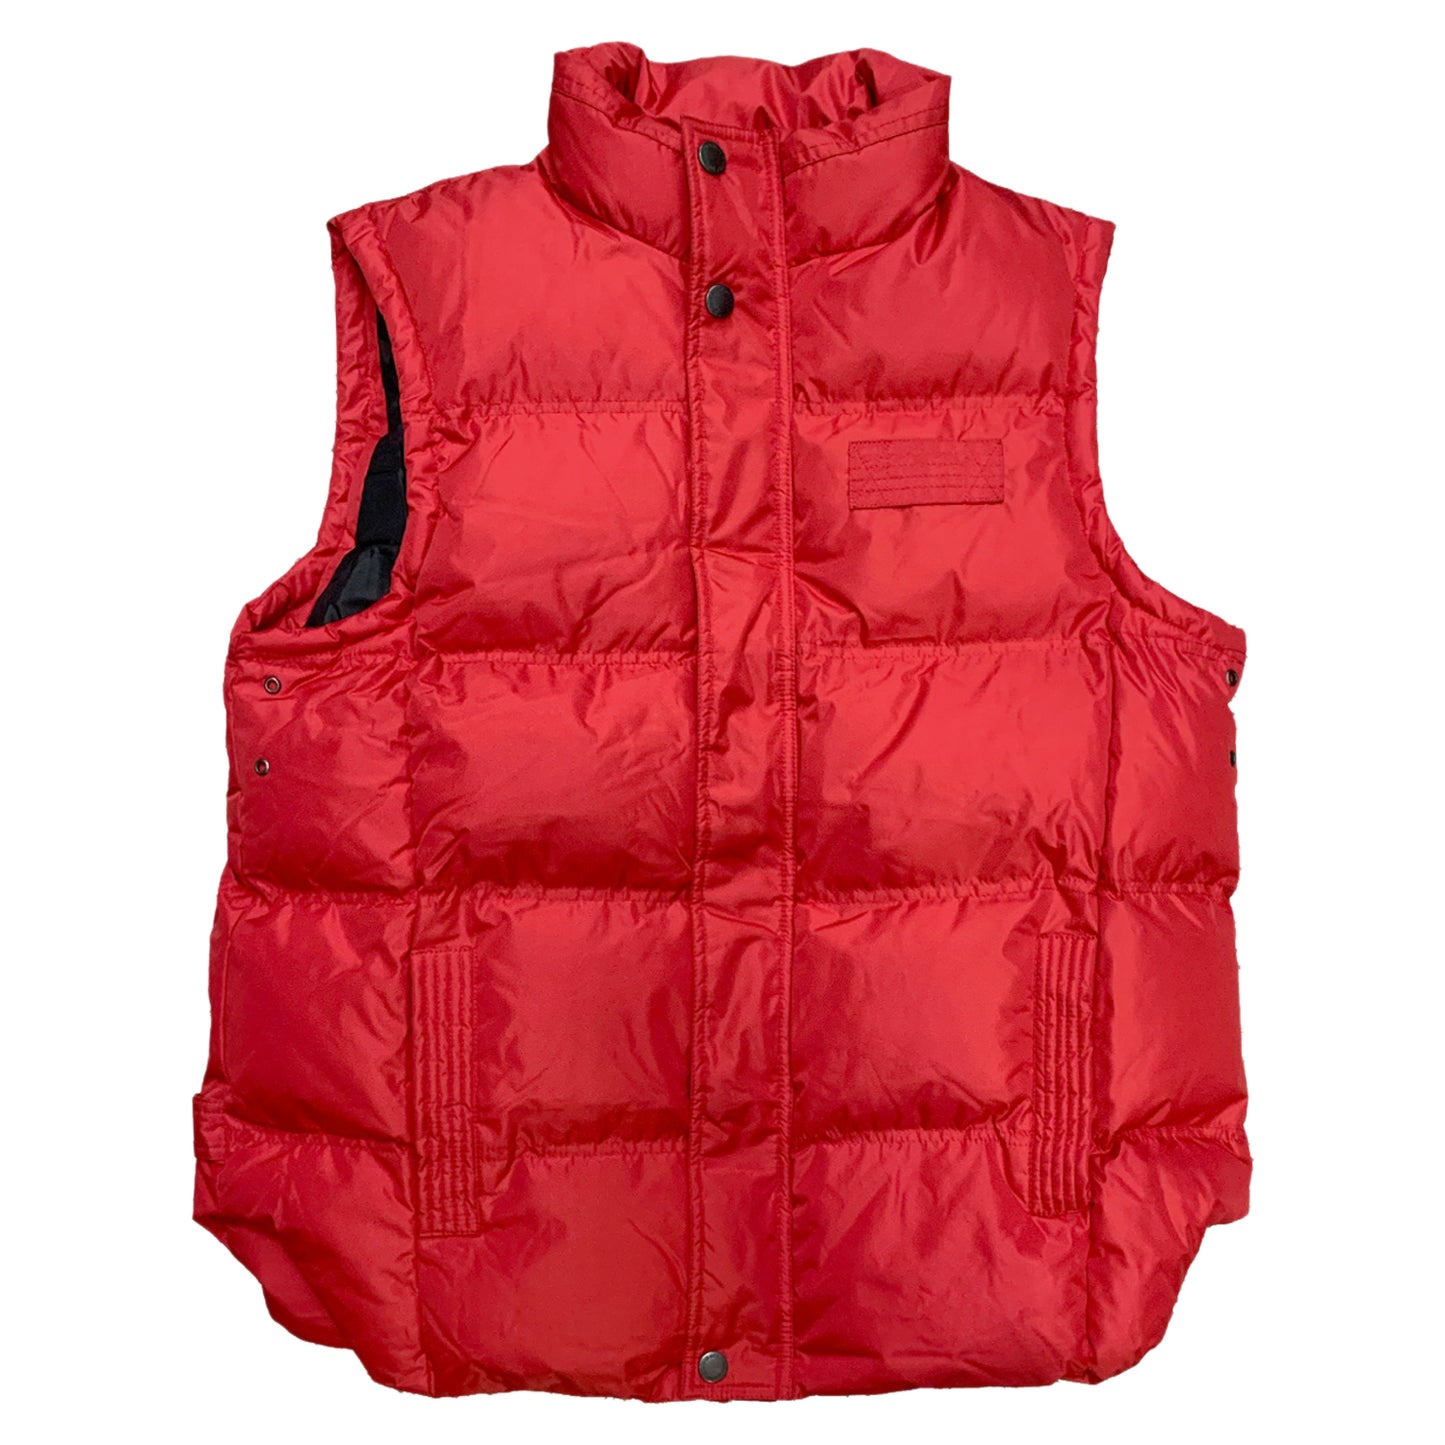 Oversize Red Puffer Vest